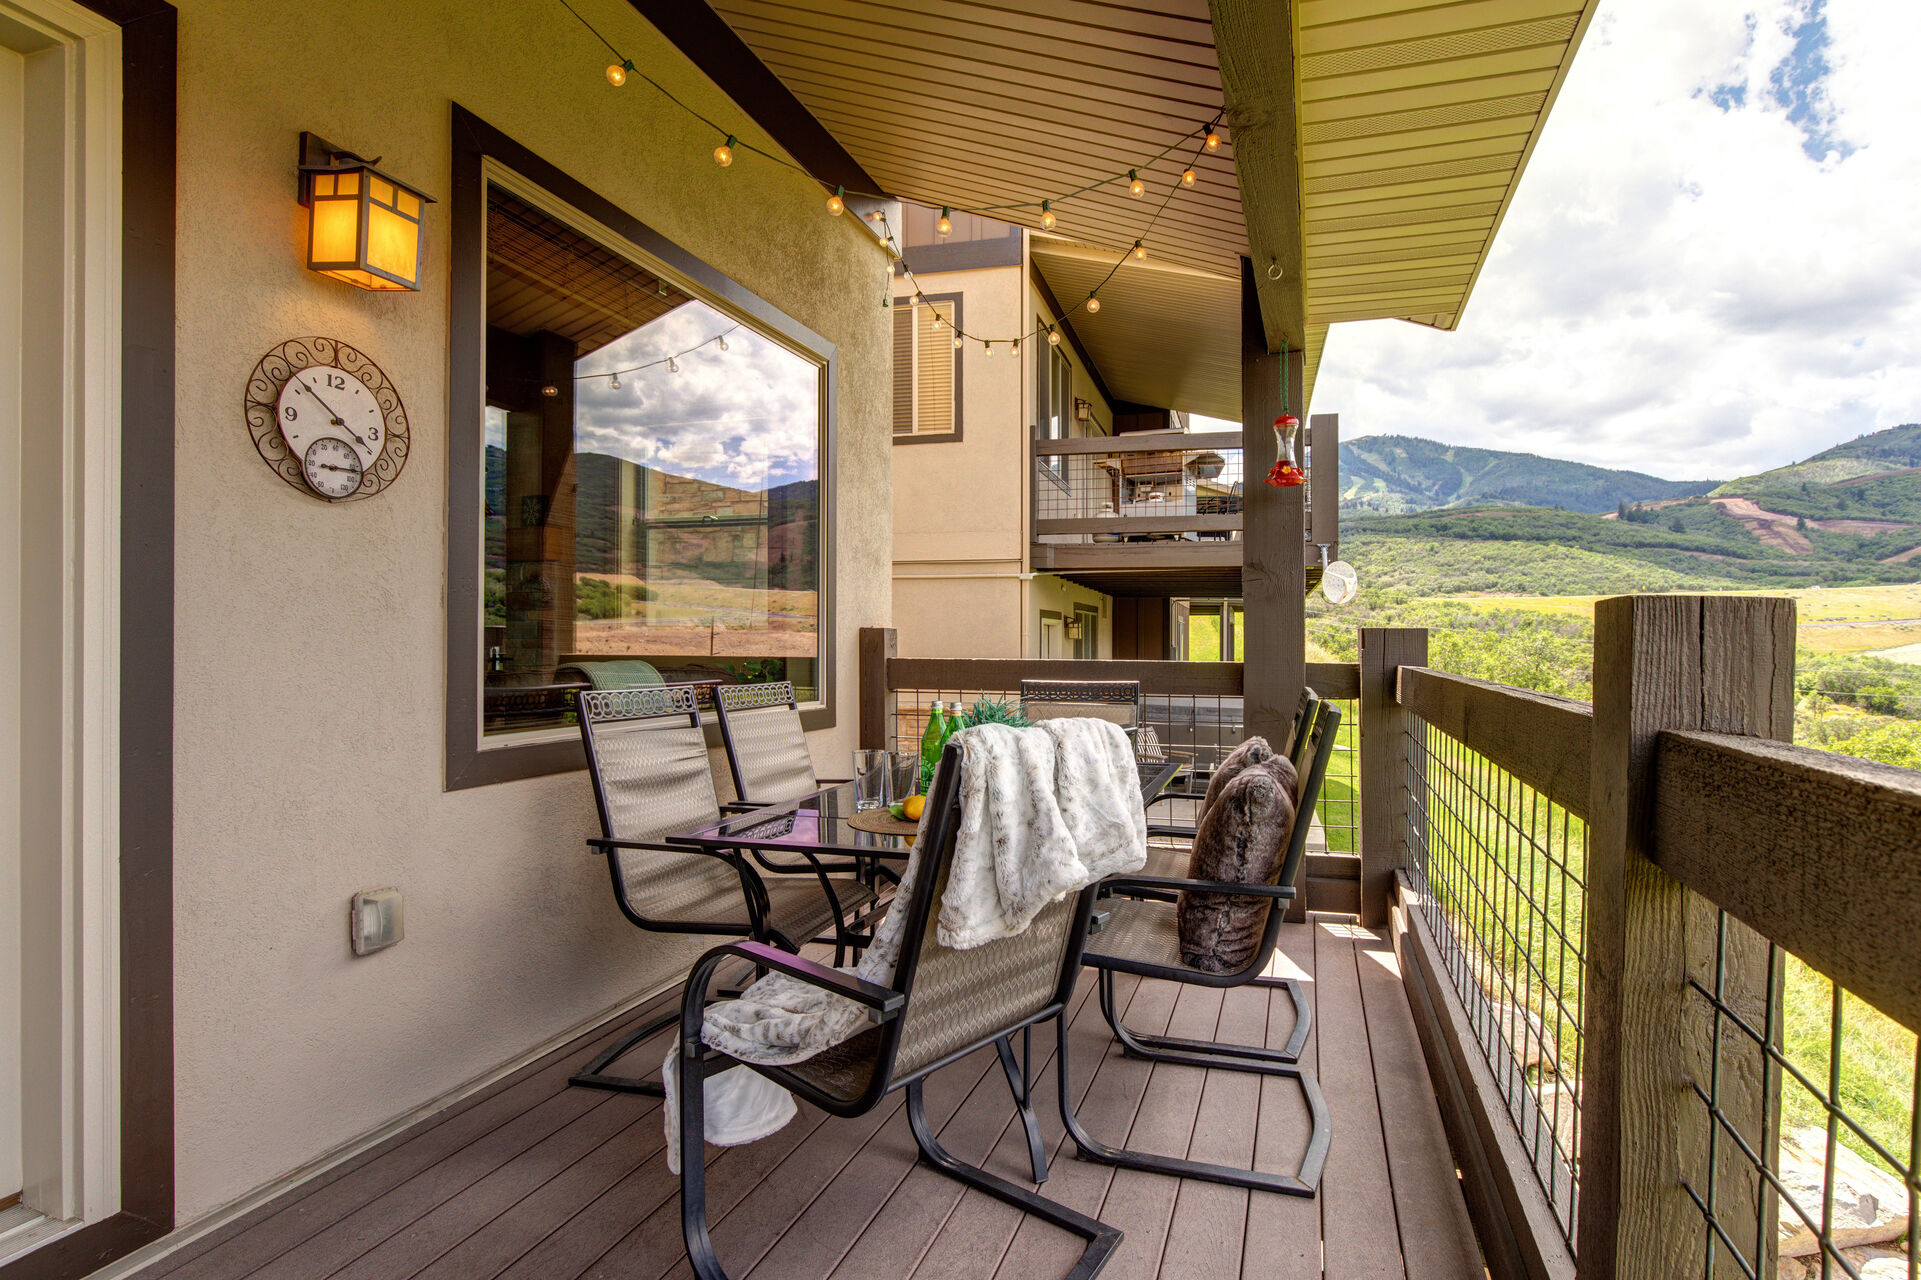 Main Level Private Deck with BBQ grill, outdoor table for 6, and breathtaking views of the Jordanelle and Deer Valley Resort